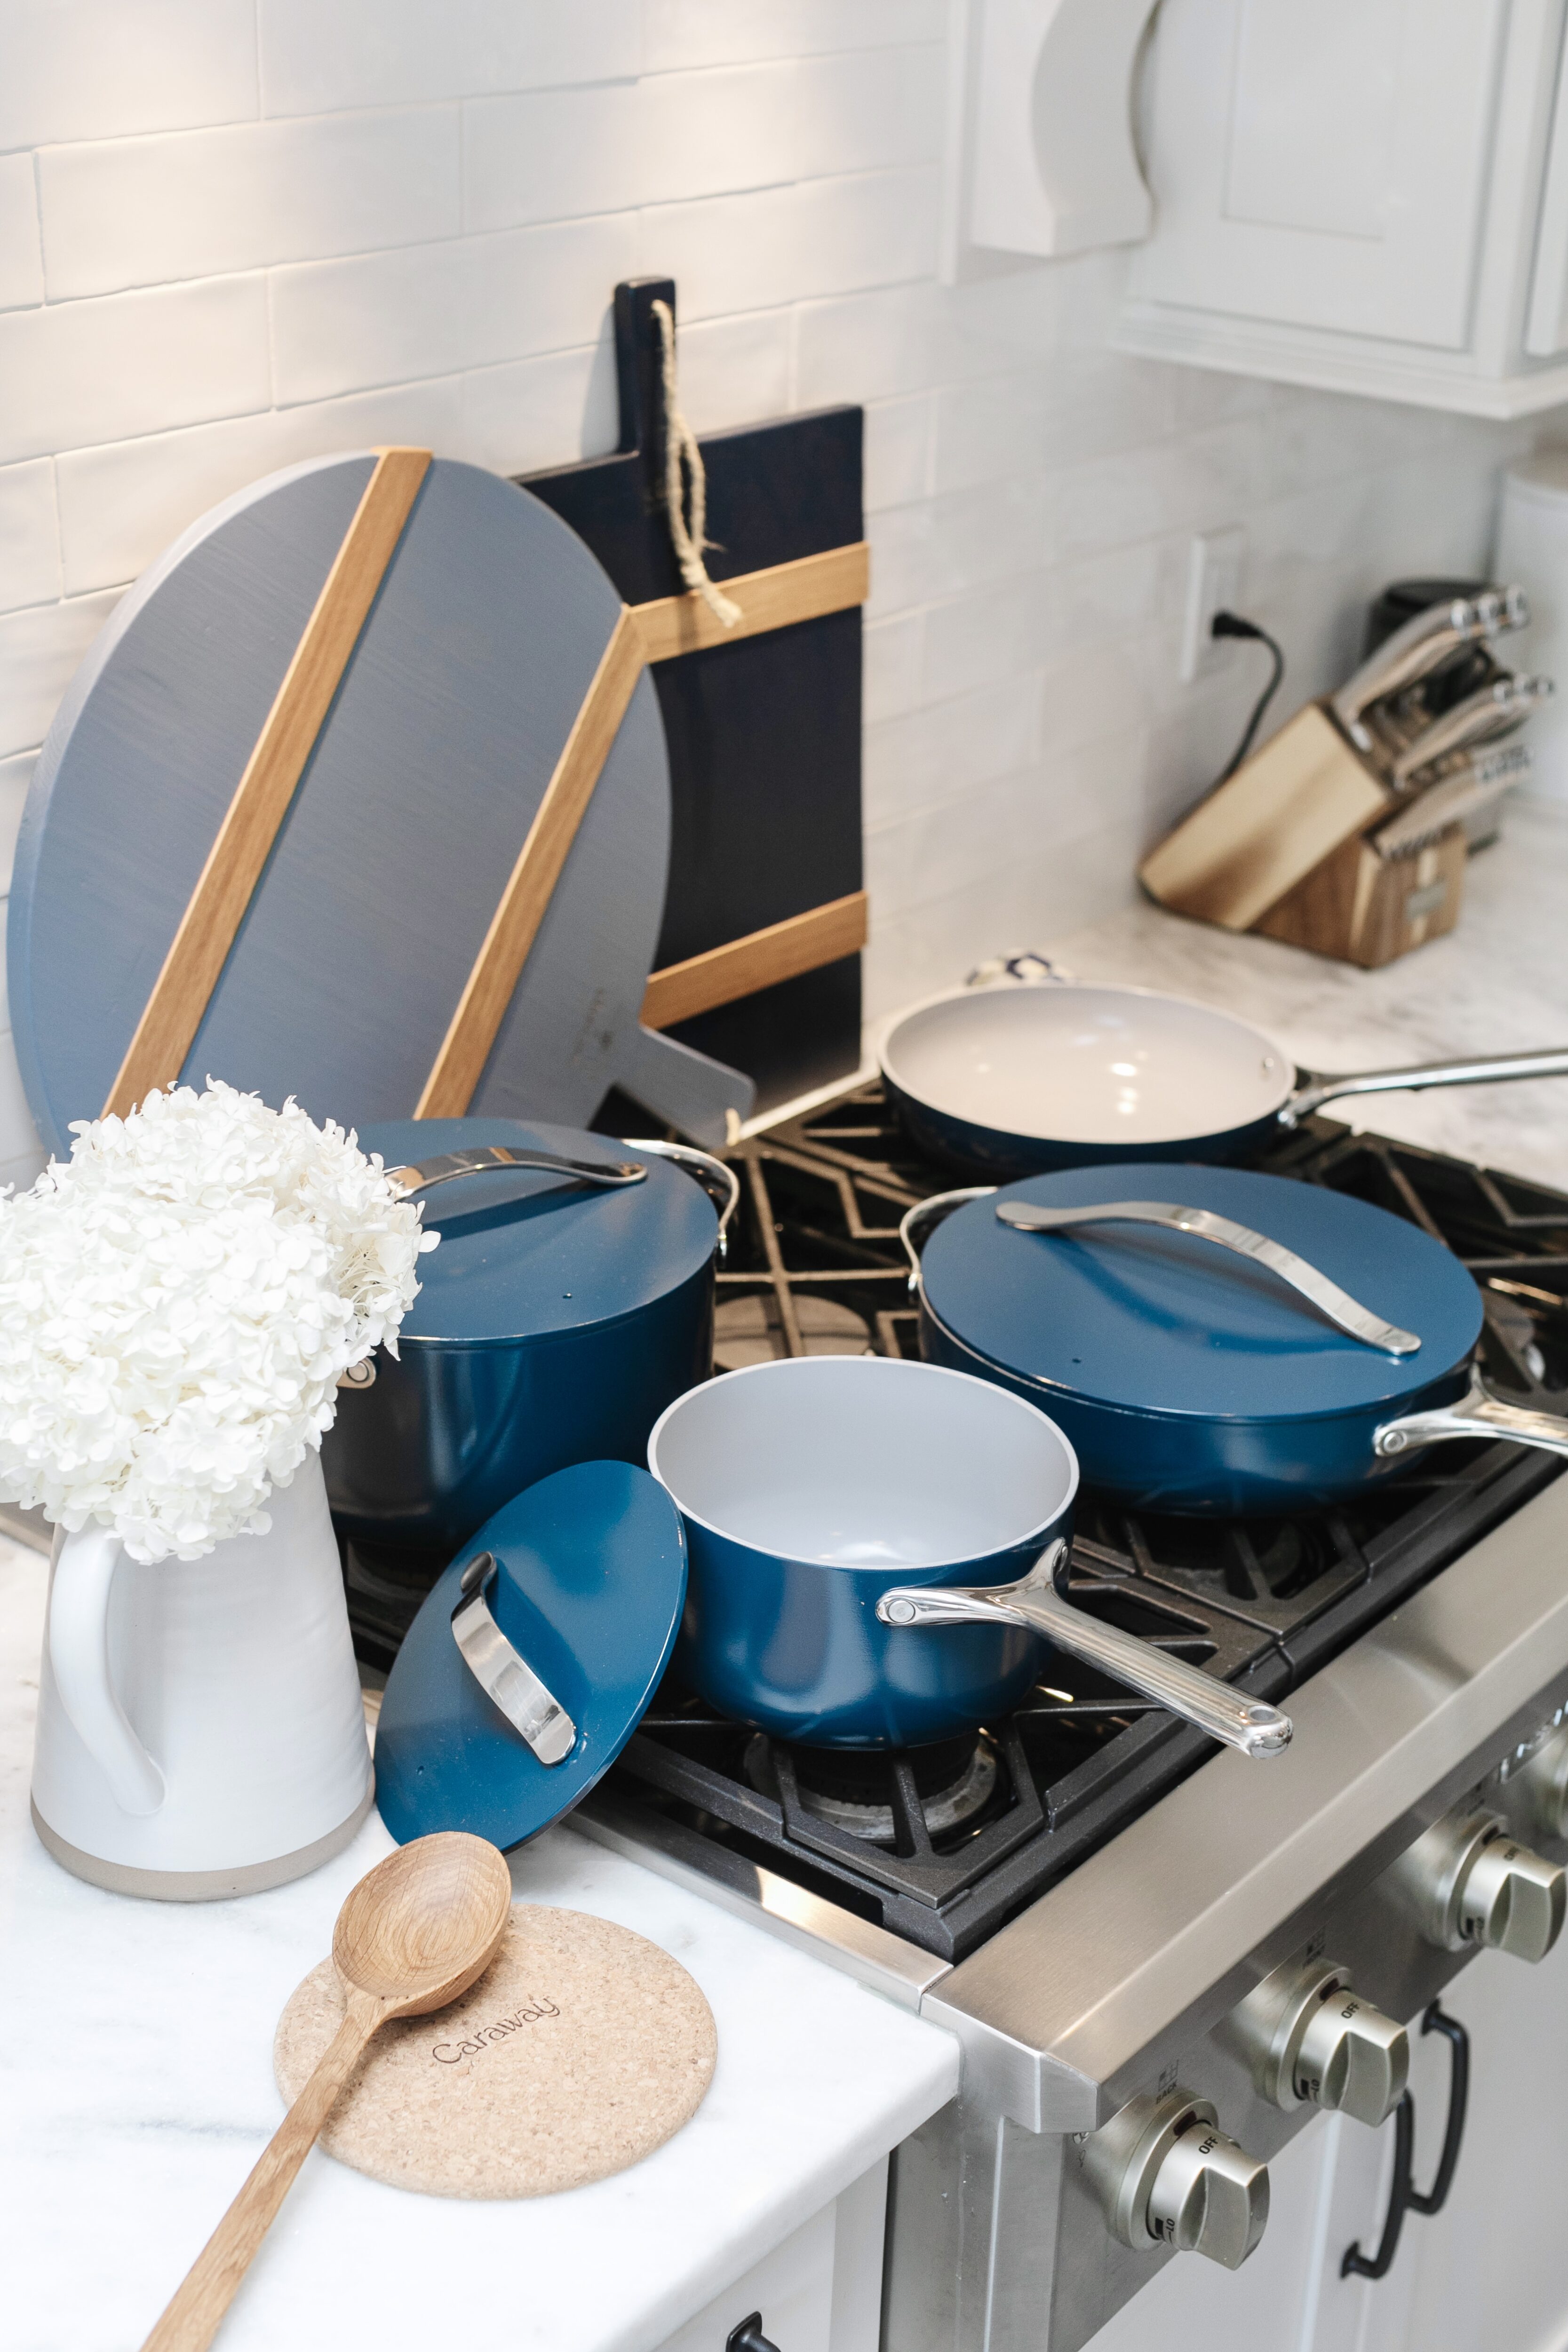 Kitchen Organization Tips Part 1: How to Organize your Pots & Pans, tips featured by top Memphis lifestyle blogger, Walking in Memphis in High Heels.